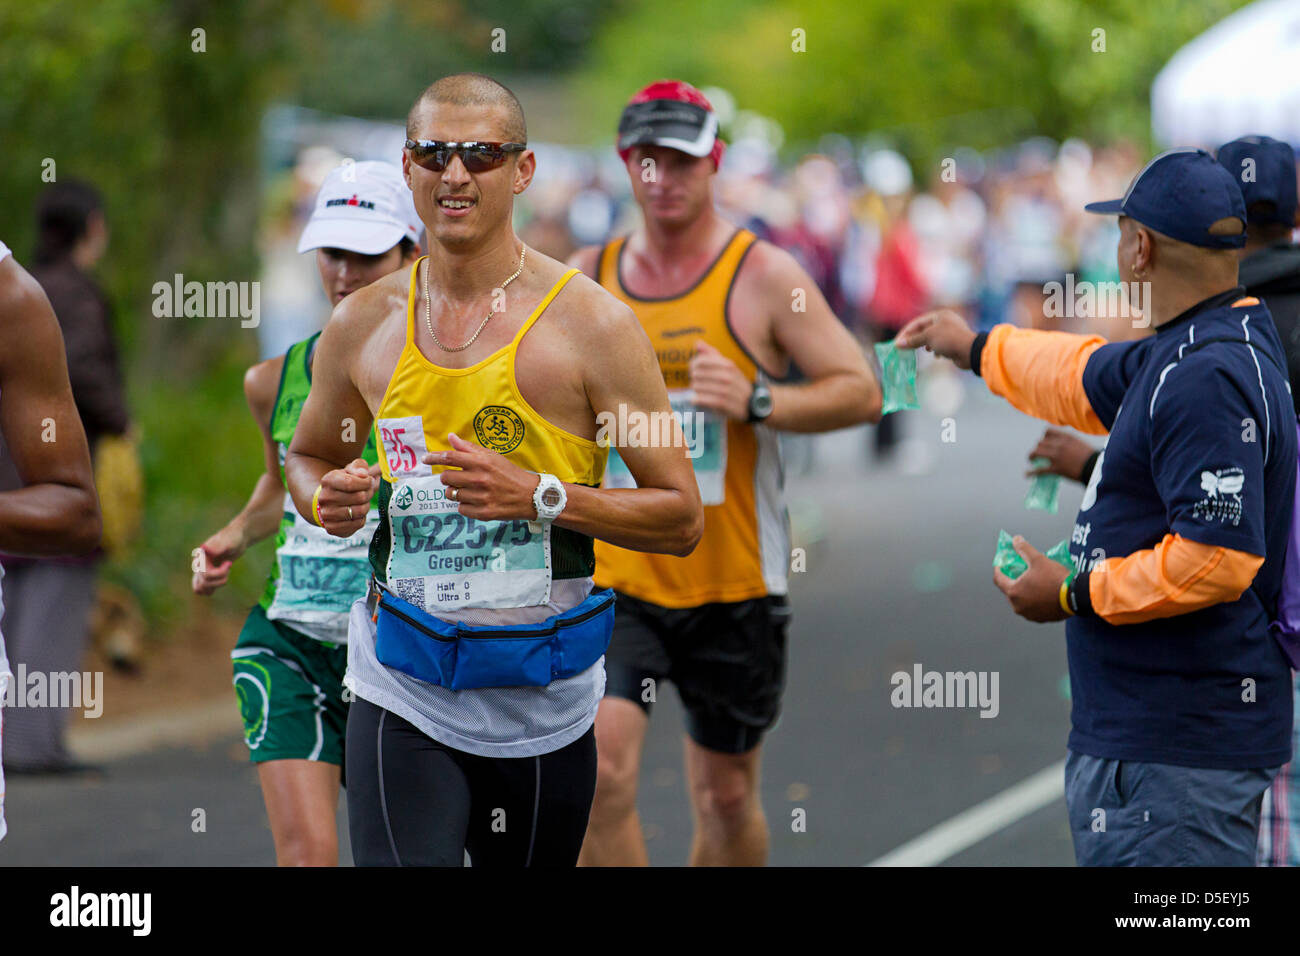 Competitors and supporters of the 44th consecutive Old Mutual Two Oceans Marathon Stock Photo